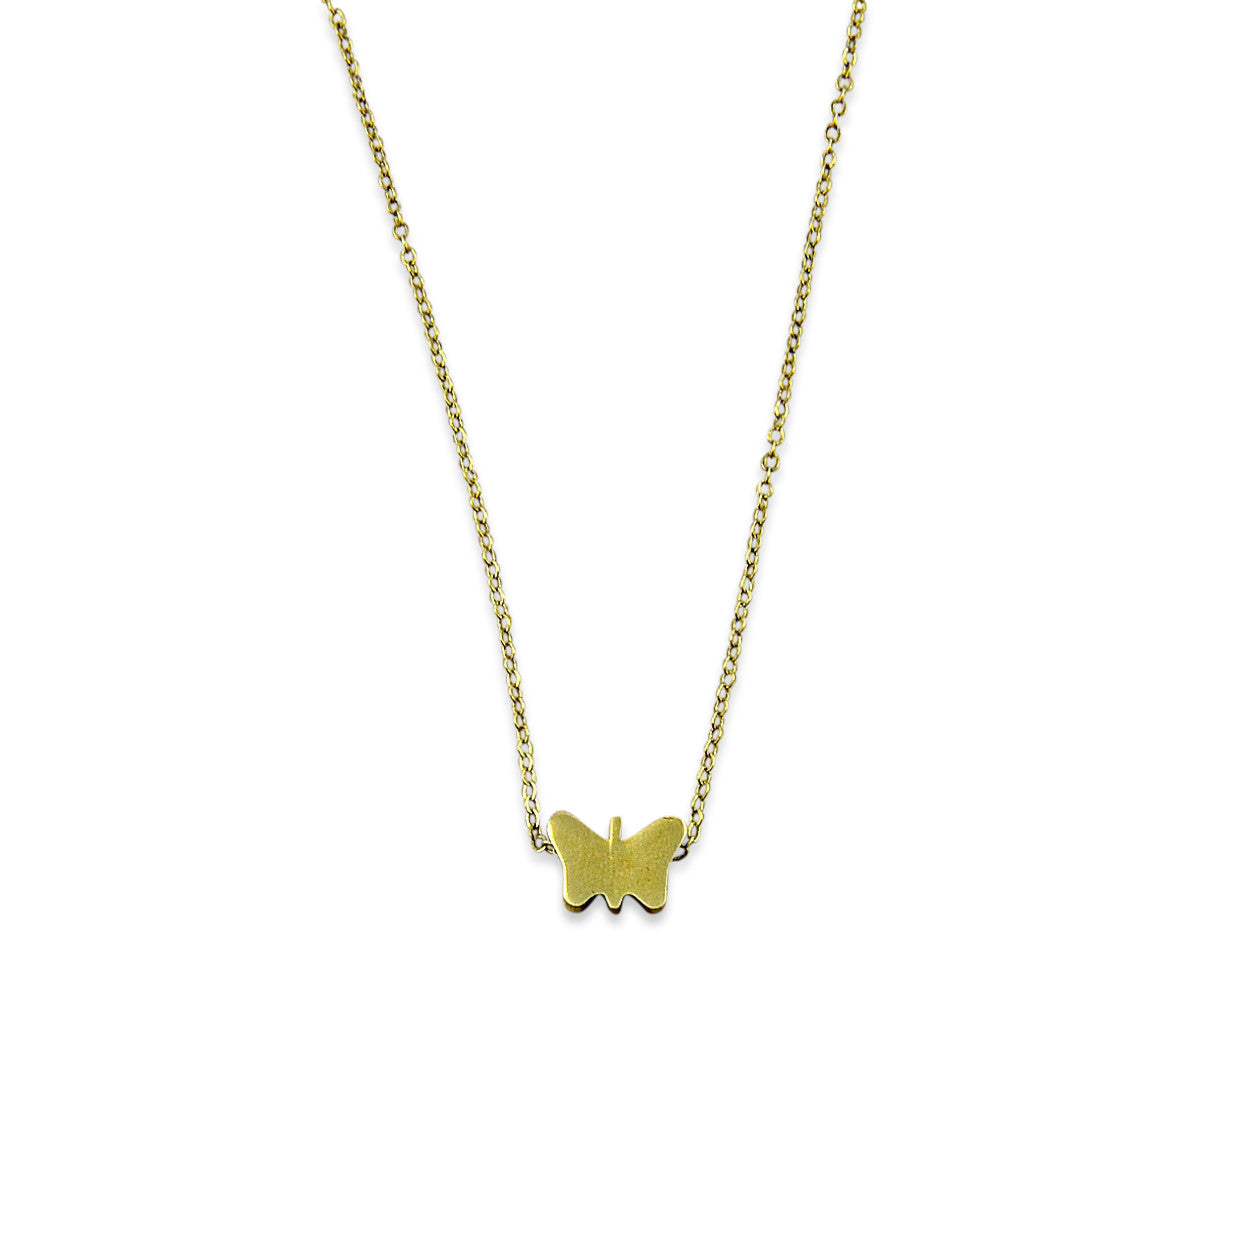 Tiny Butterfly Necklace - Gwen Delicious Jewelry Designs